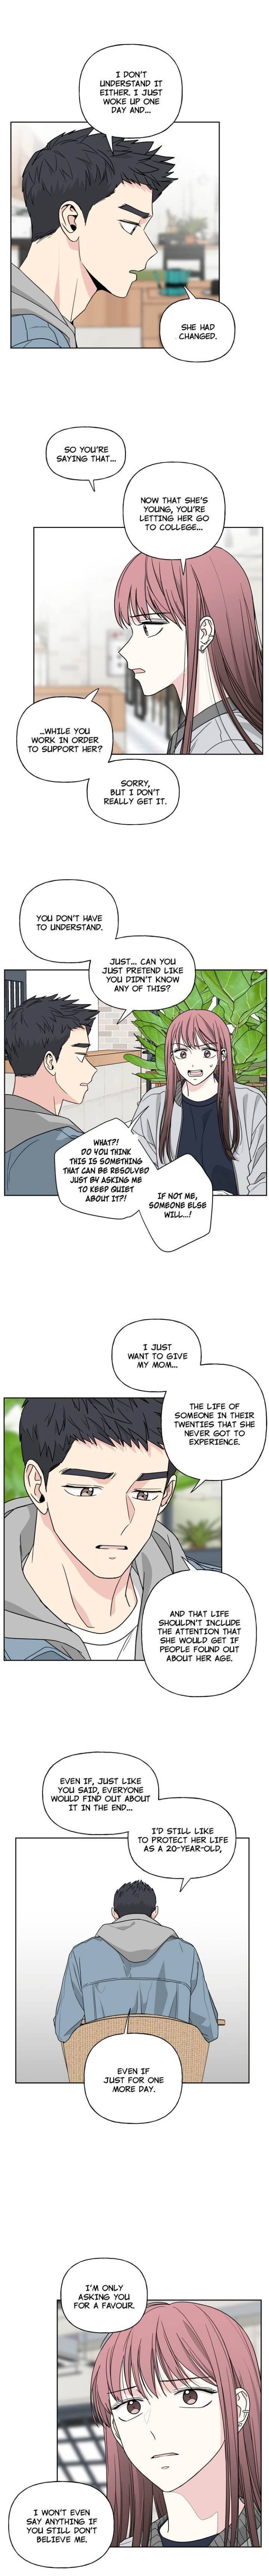 mother-im-sorry-chap-34-4